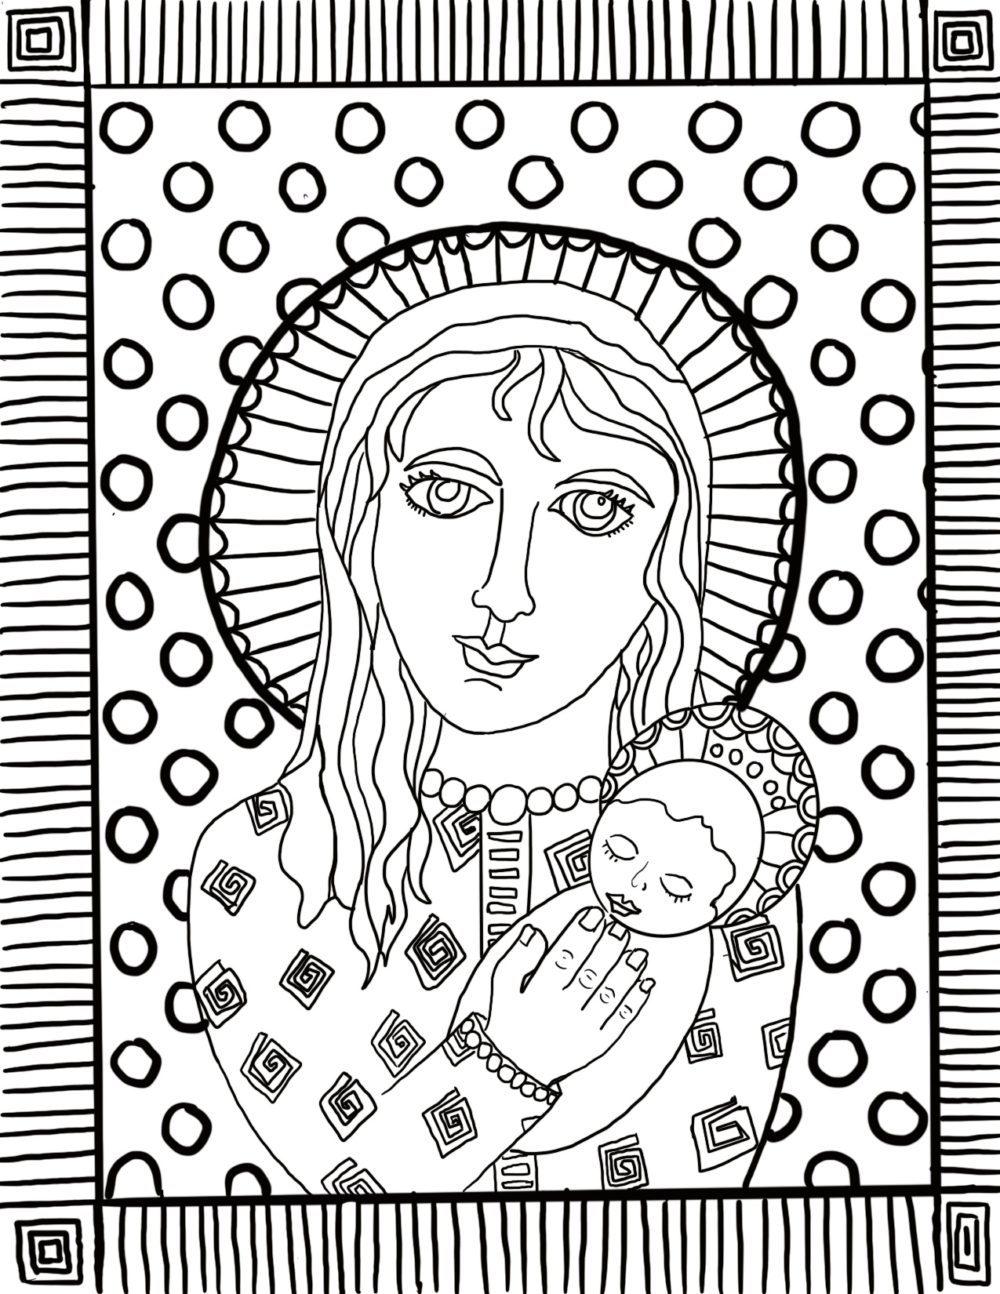 Mother and childâfinal christmas coloring page â from victory road